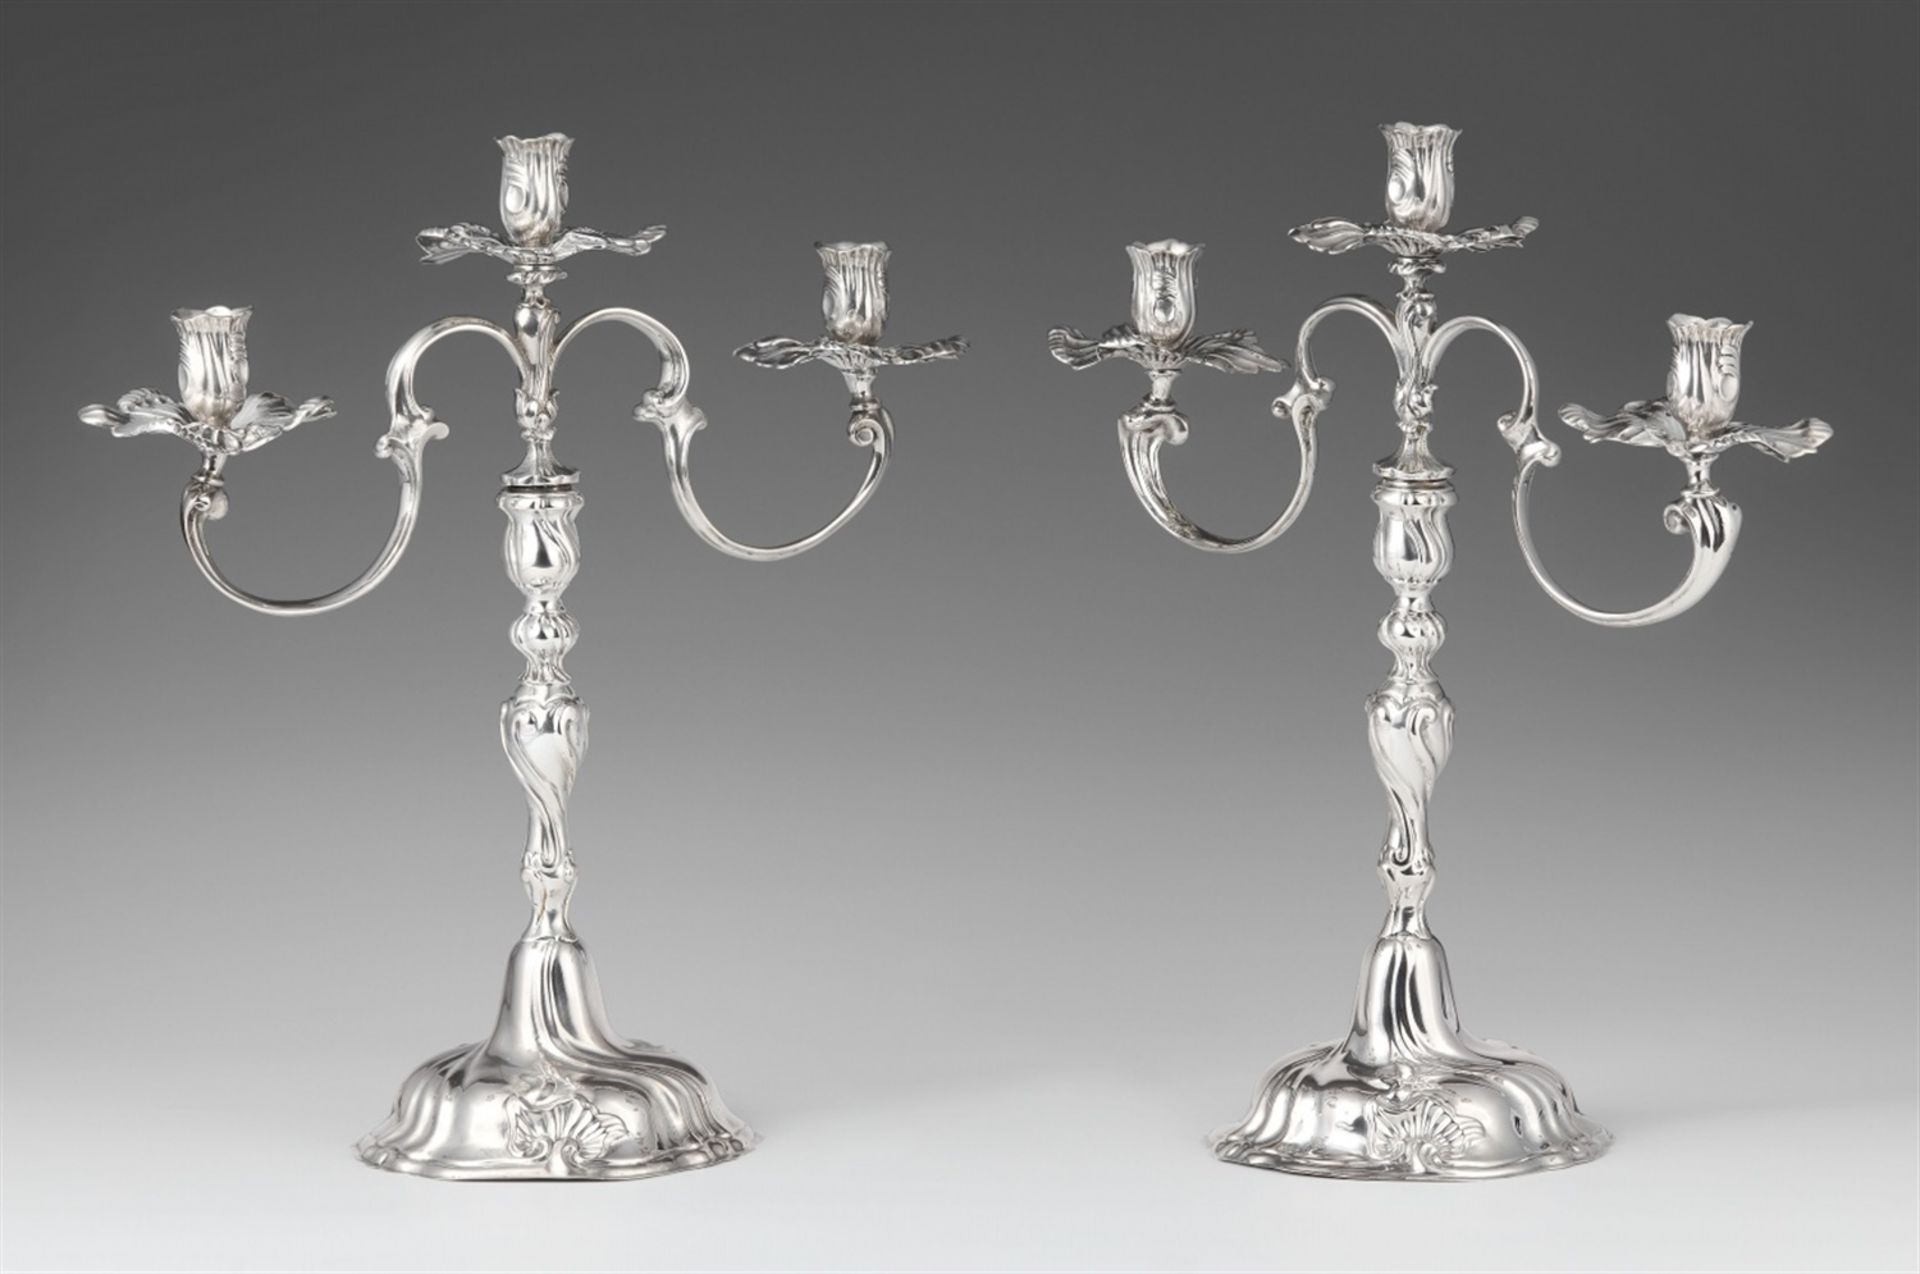 A pair of Braunschweig silver candelabraSilver. Baluster-form shafts with shellwork décor and